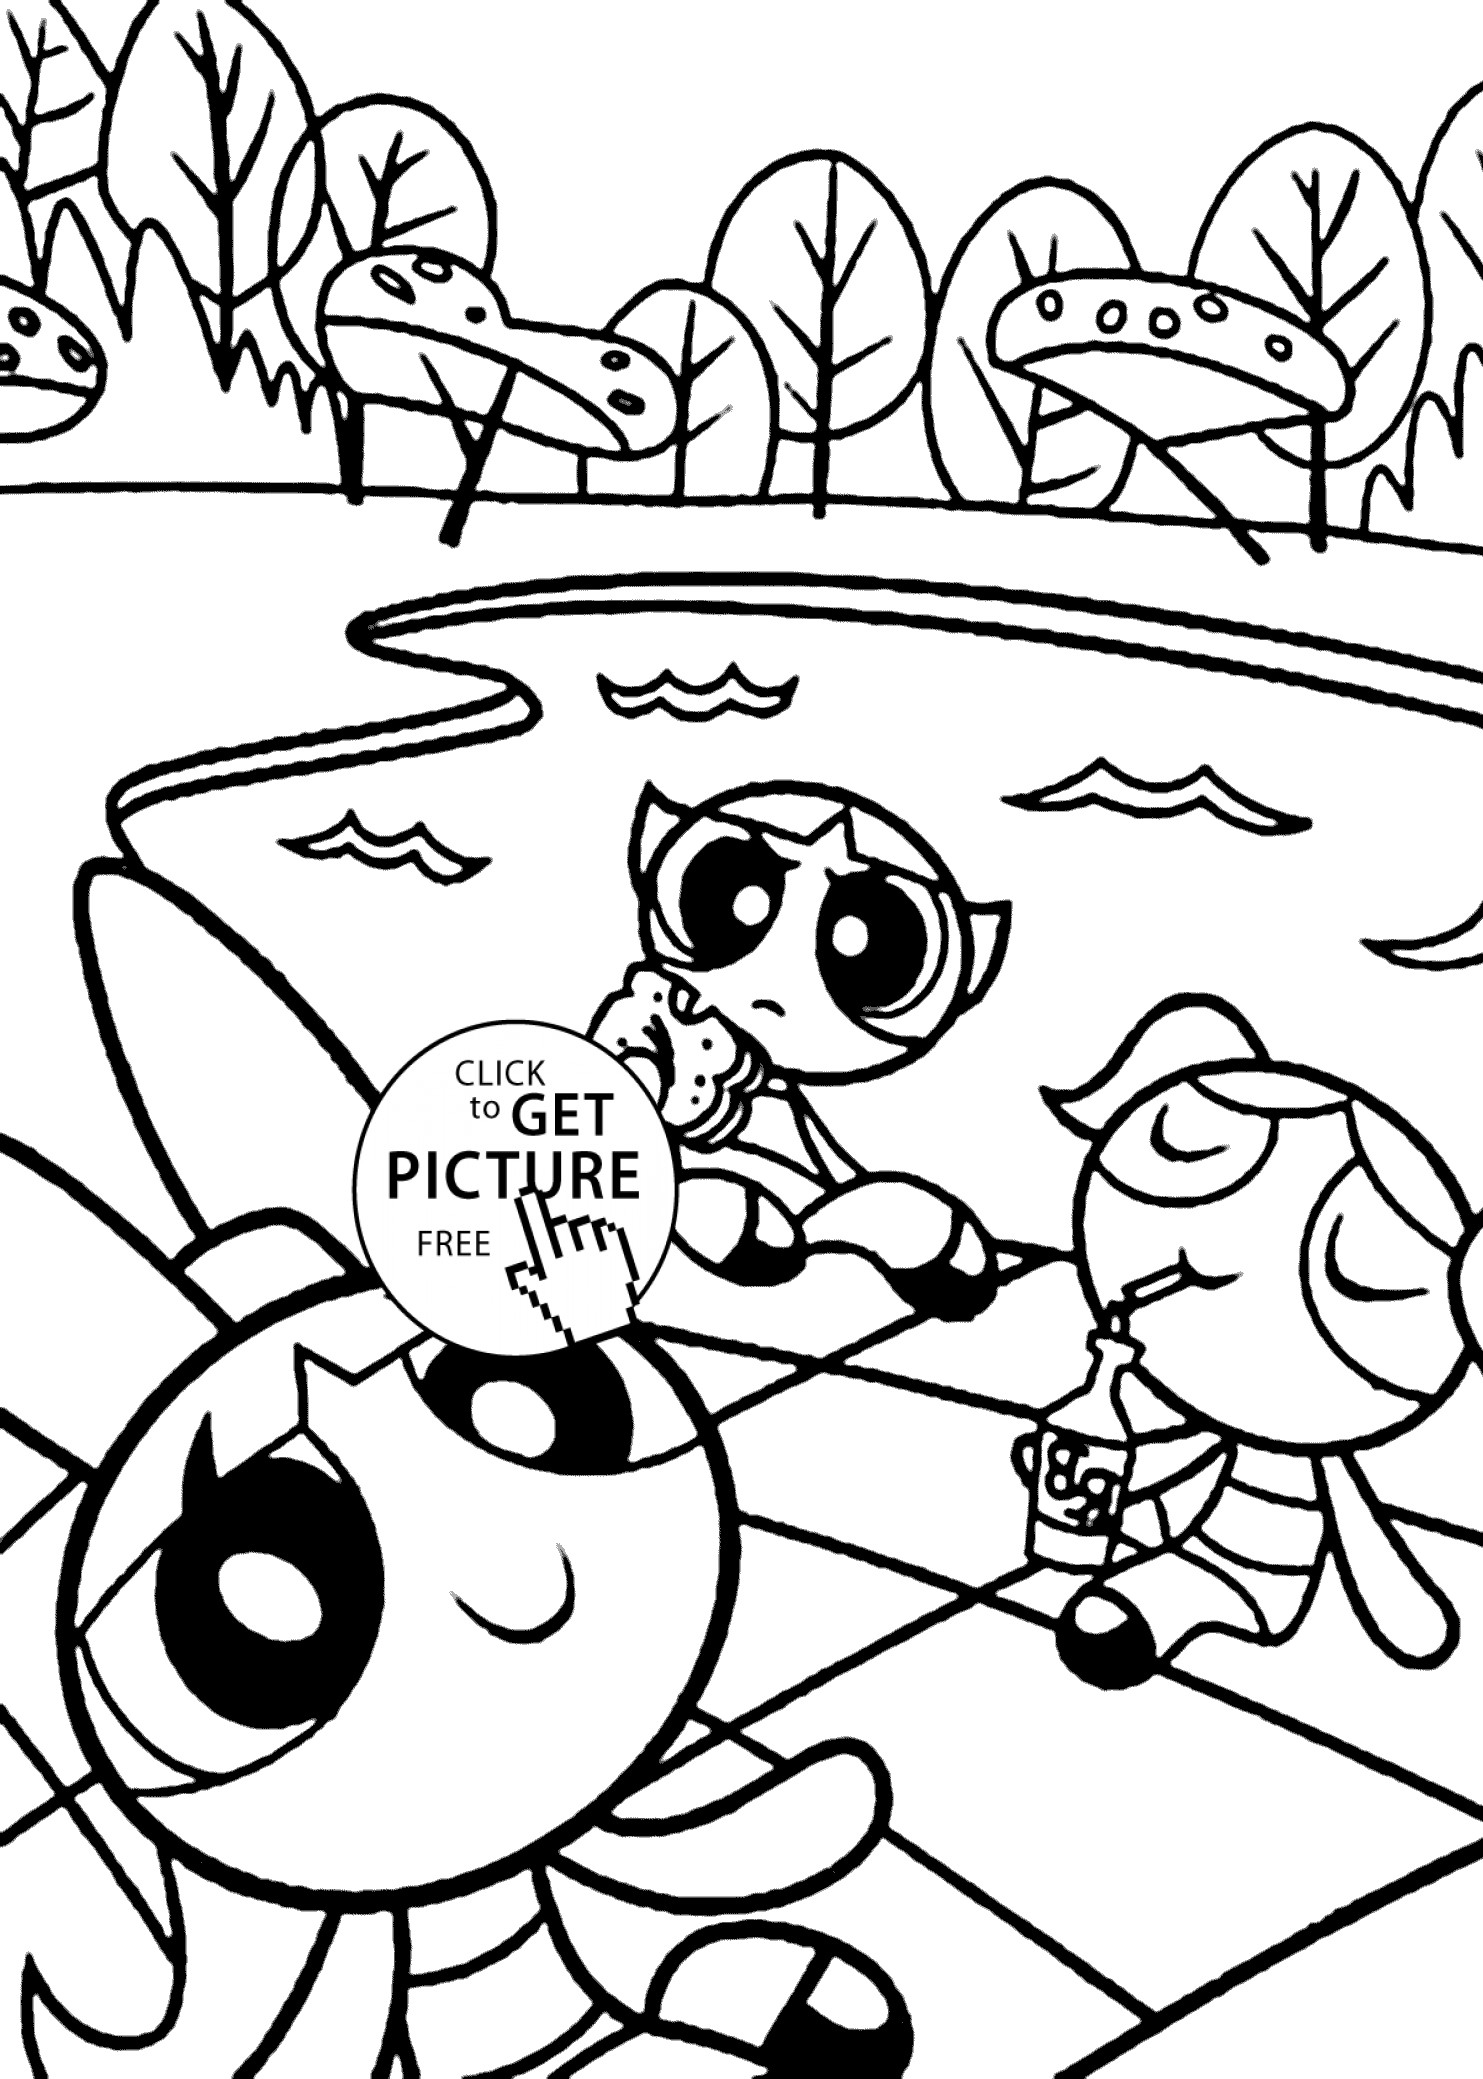 Powerpuff Girls Coloring Sheet
 Powerpuff girls on vacation coloring pages for kids